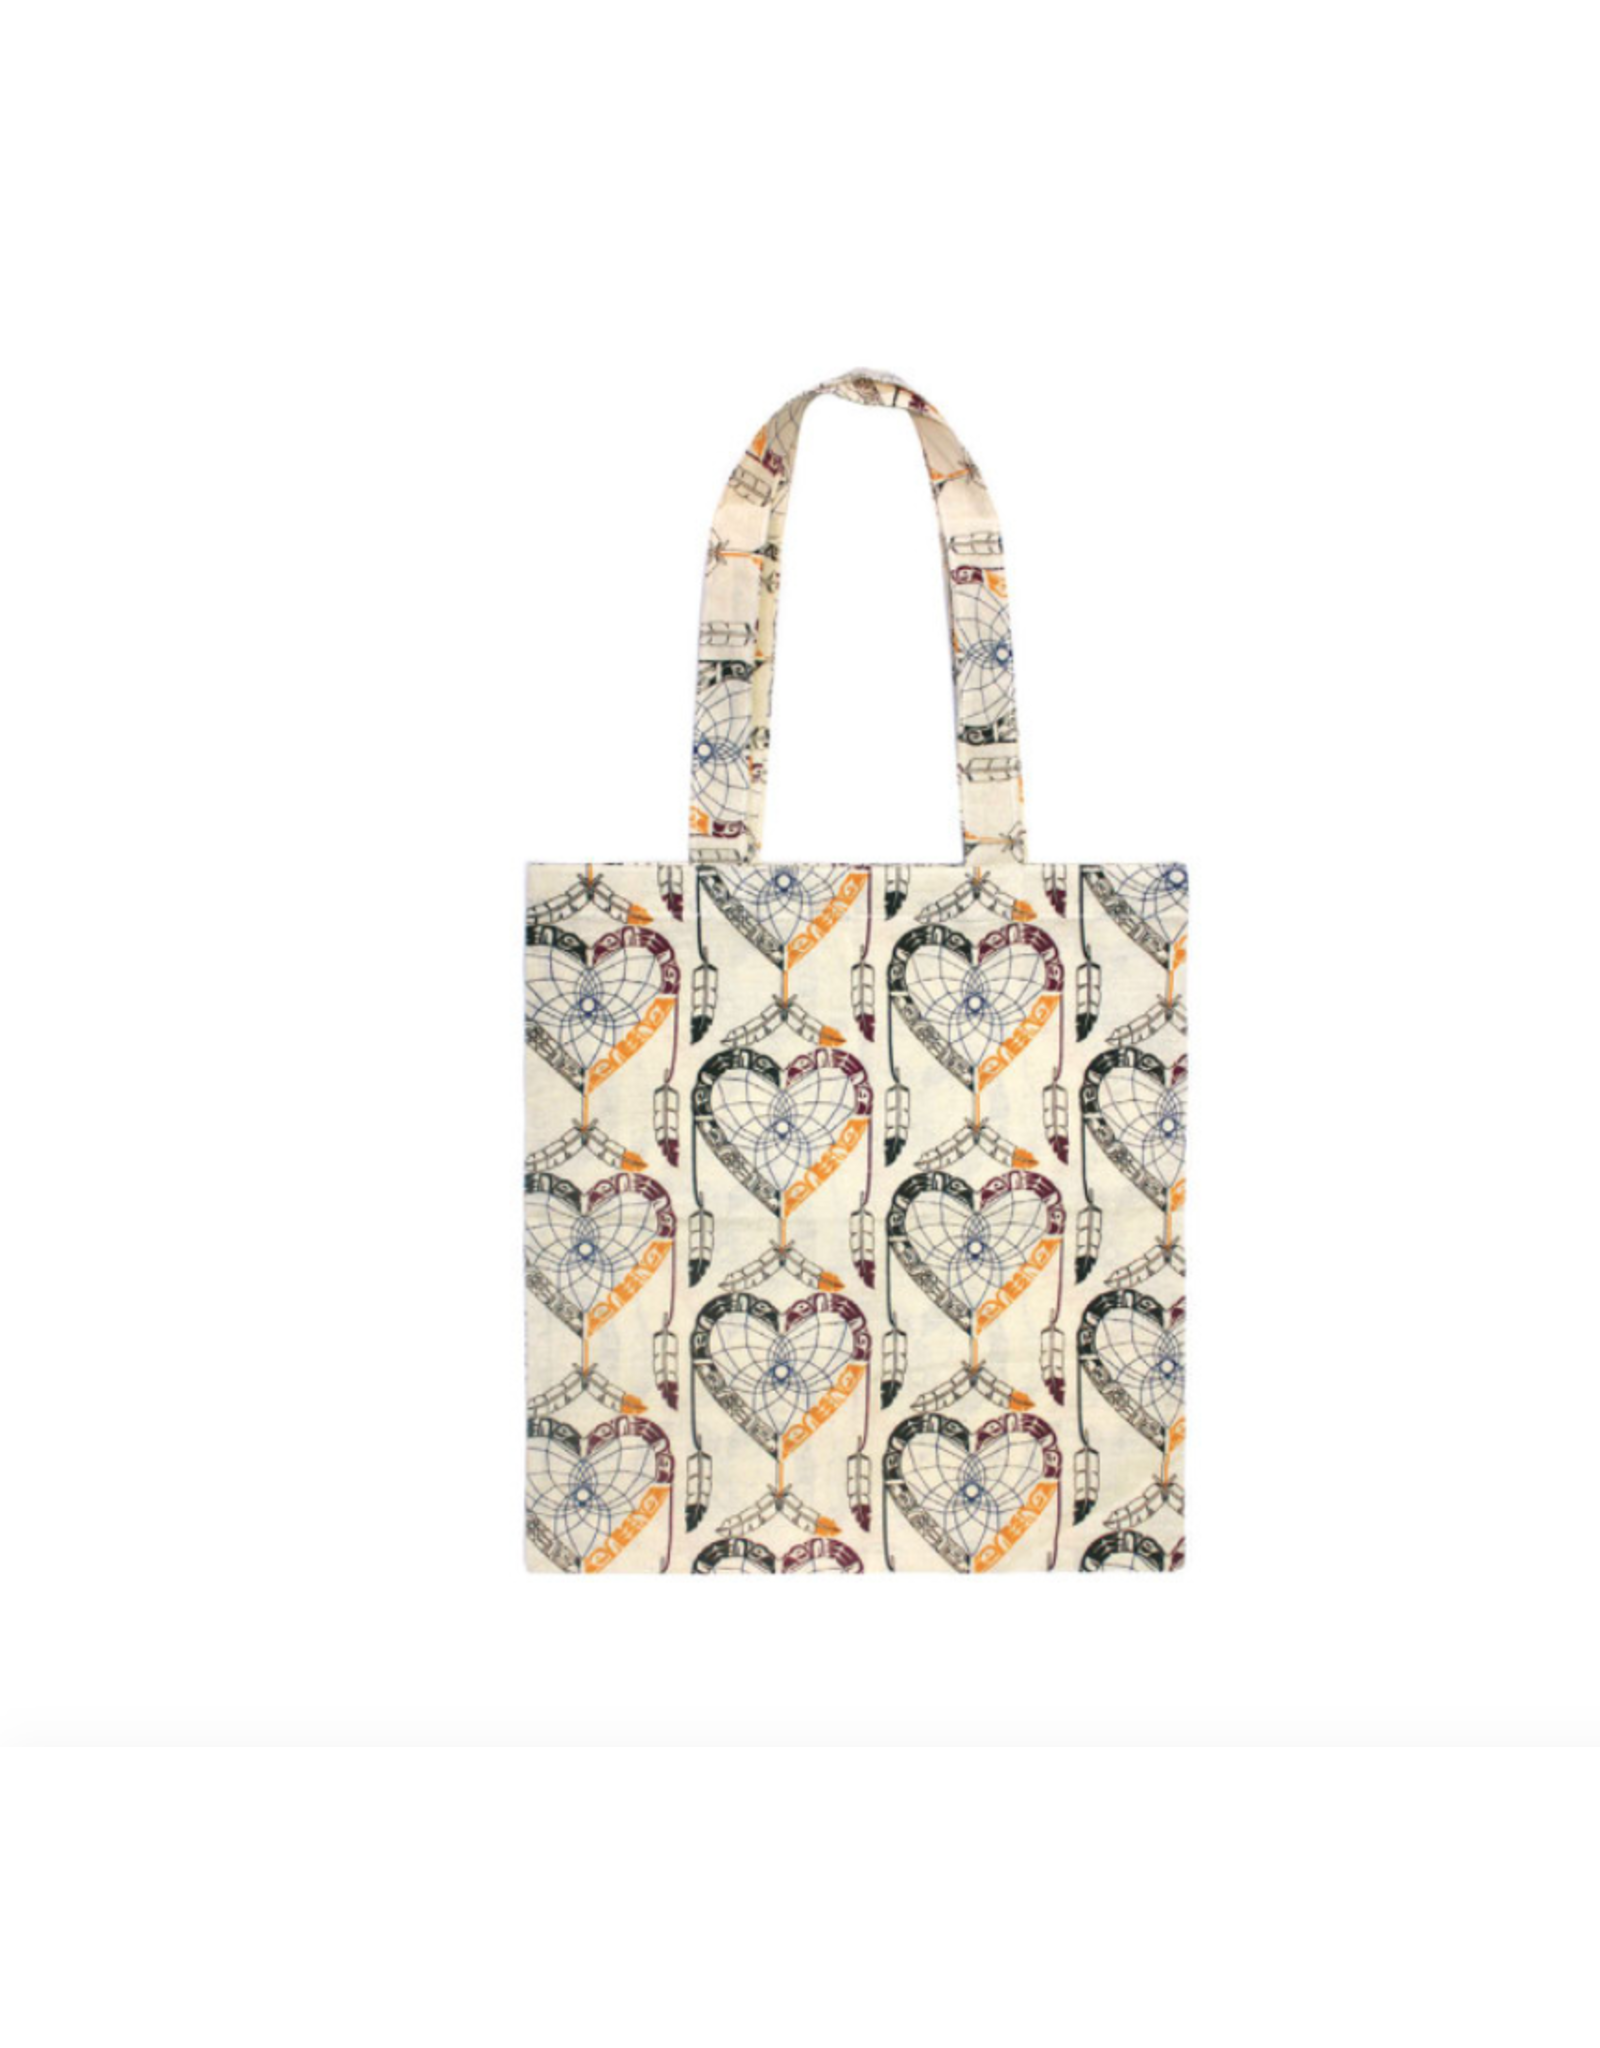 Cotton Eco Tote - Healing Eagle Heart by Mervin Windsor